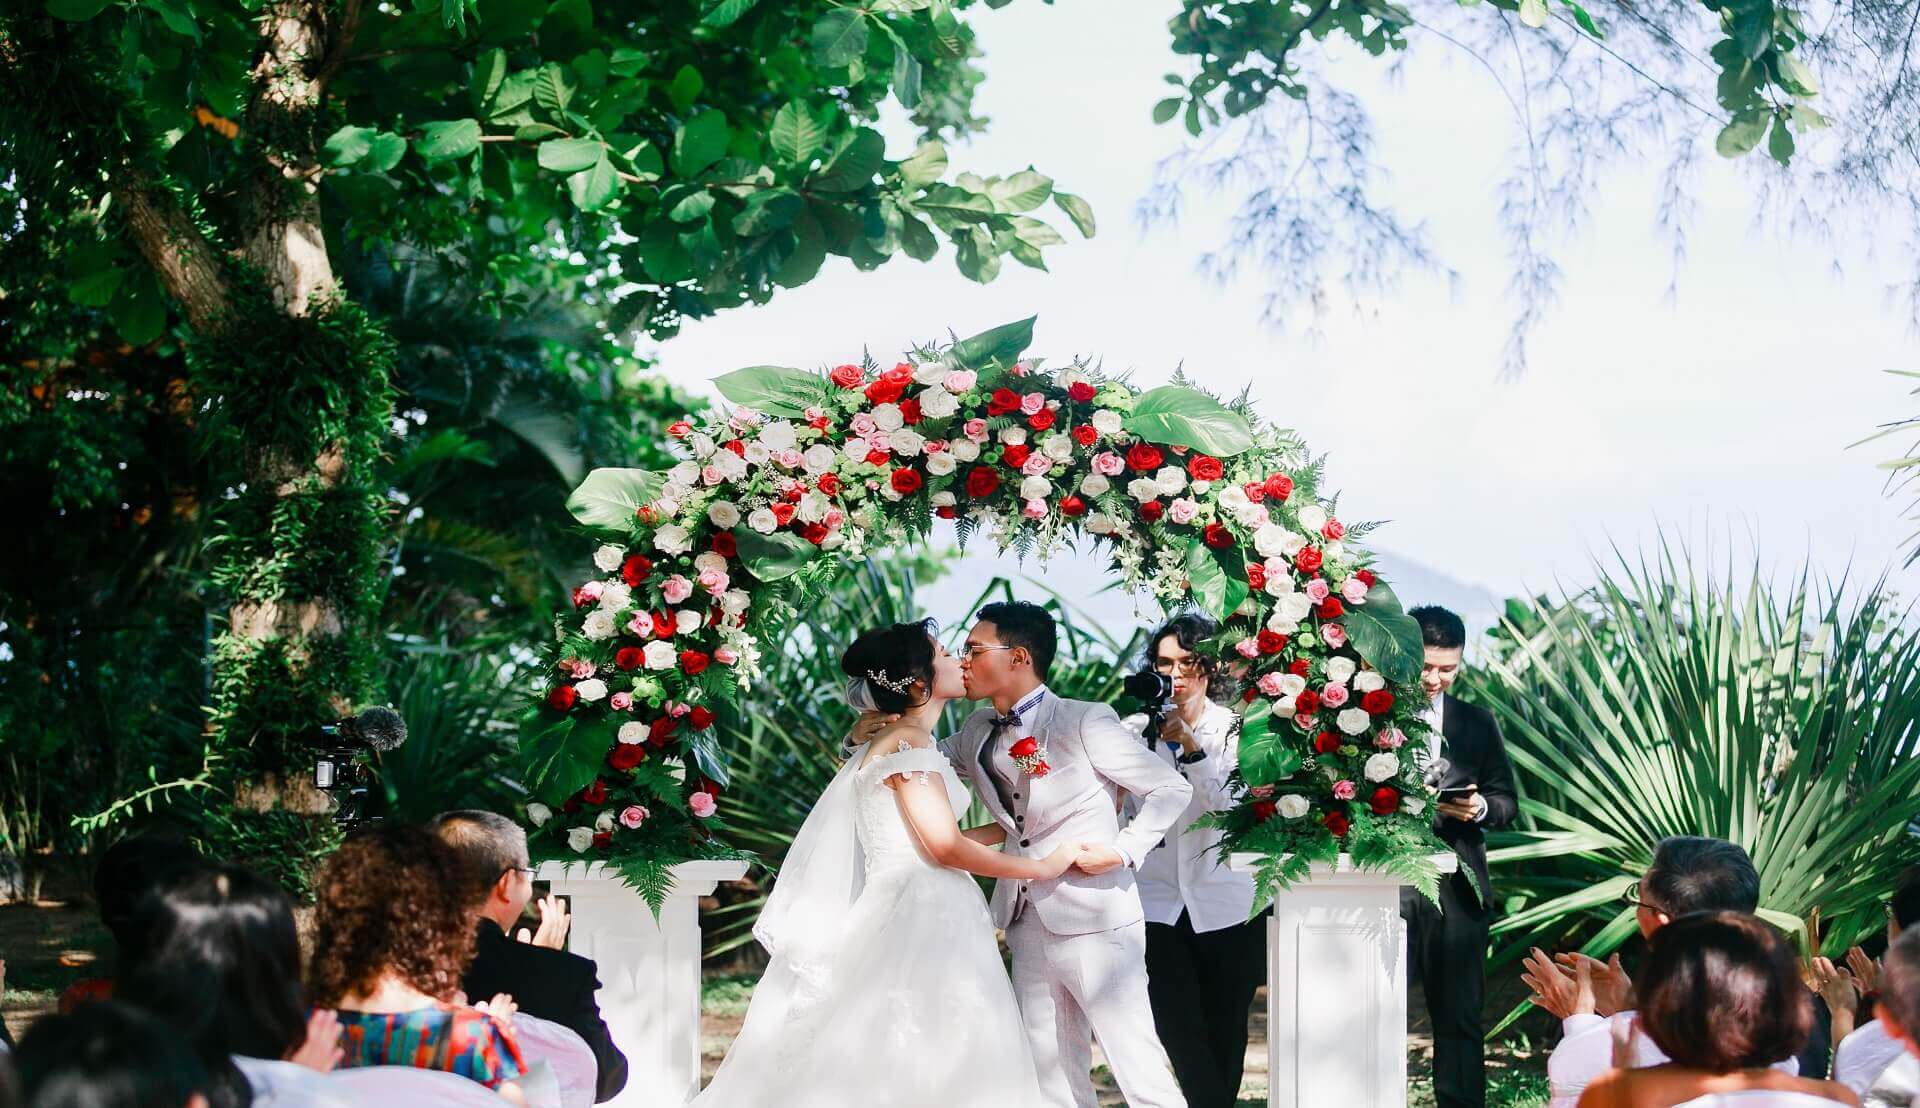 Sugar & Spice Events - Newlywed couple dip kiss outdoor ceremony flowers garden wedding beach floral arch